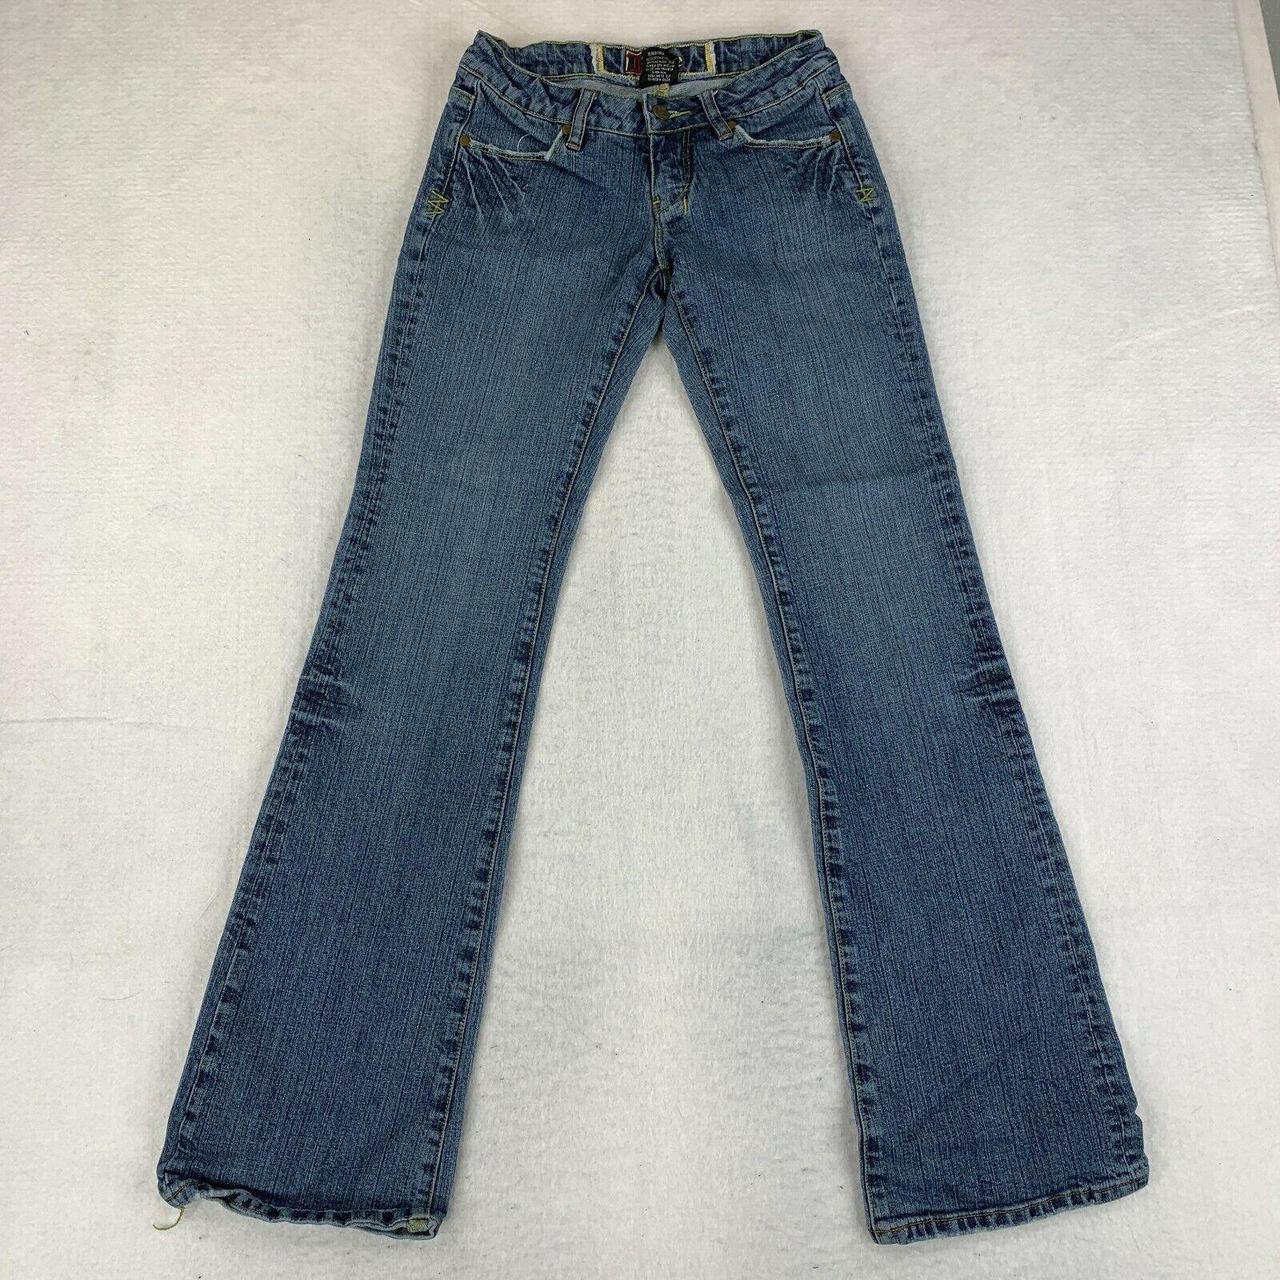 Product Image 1 - Bnble Jeans Womens Size 26